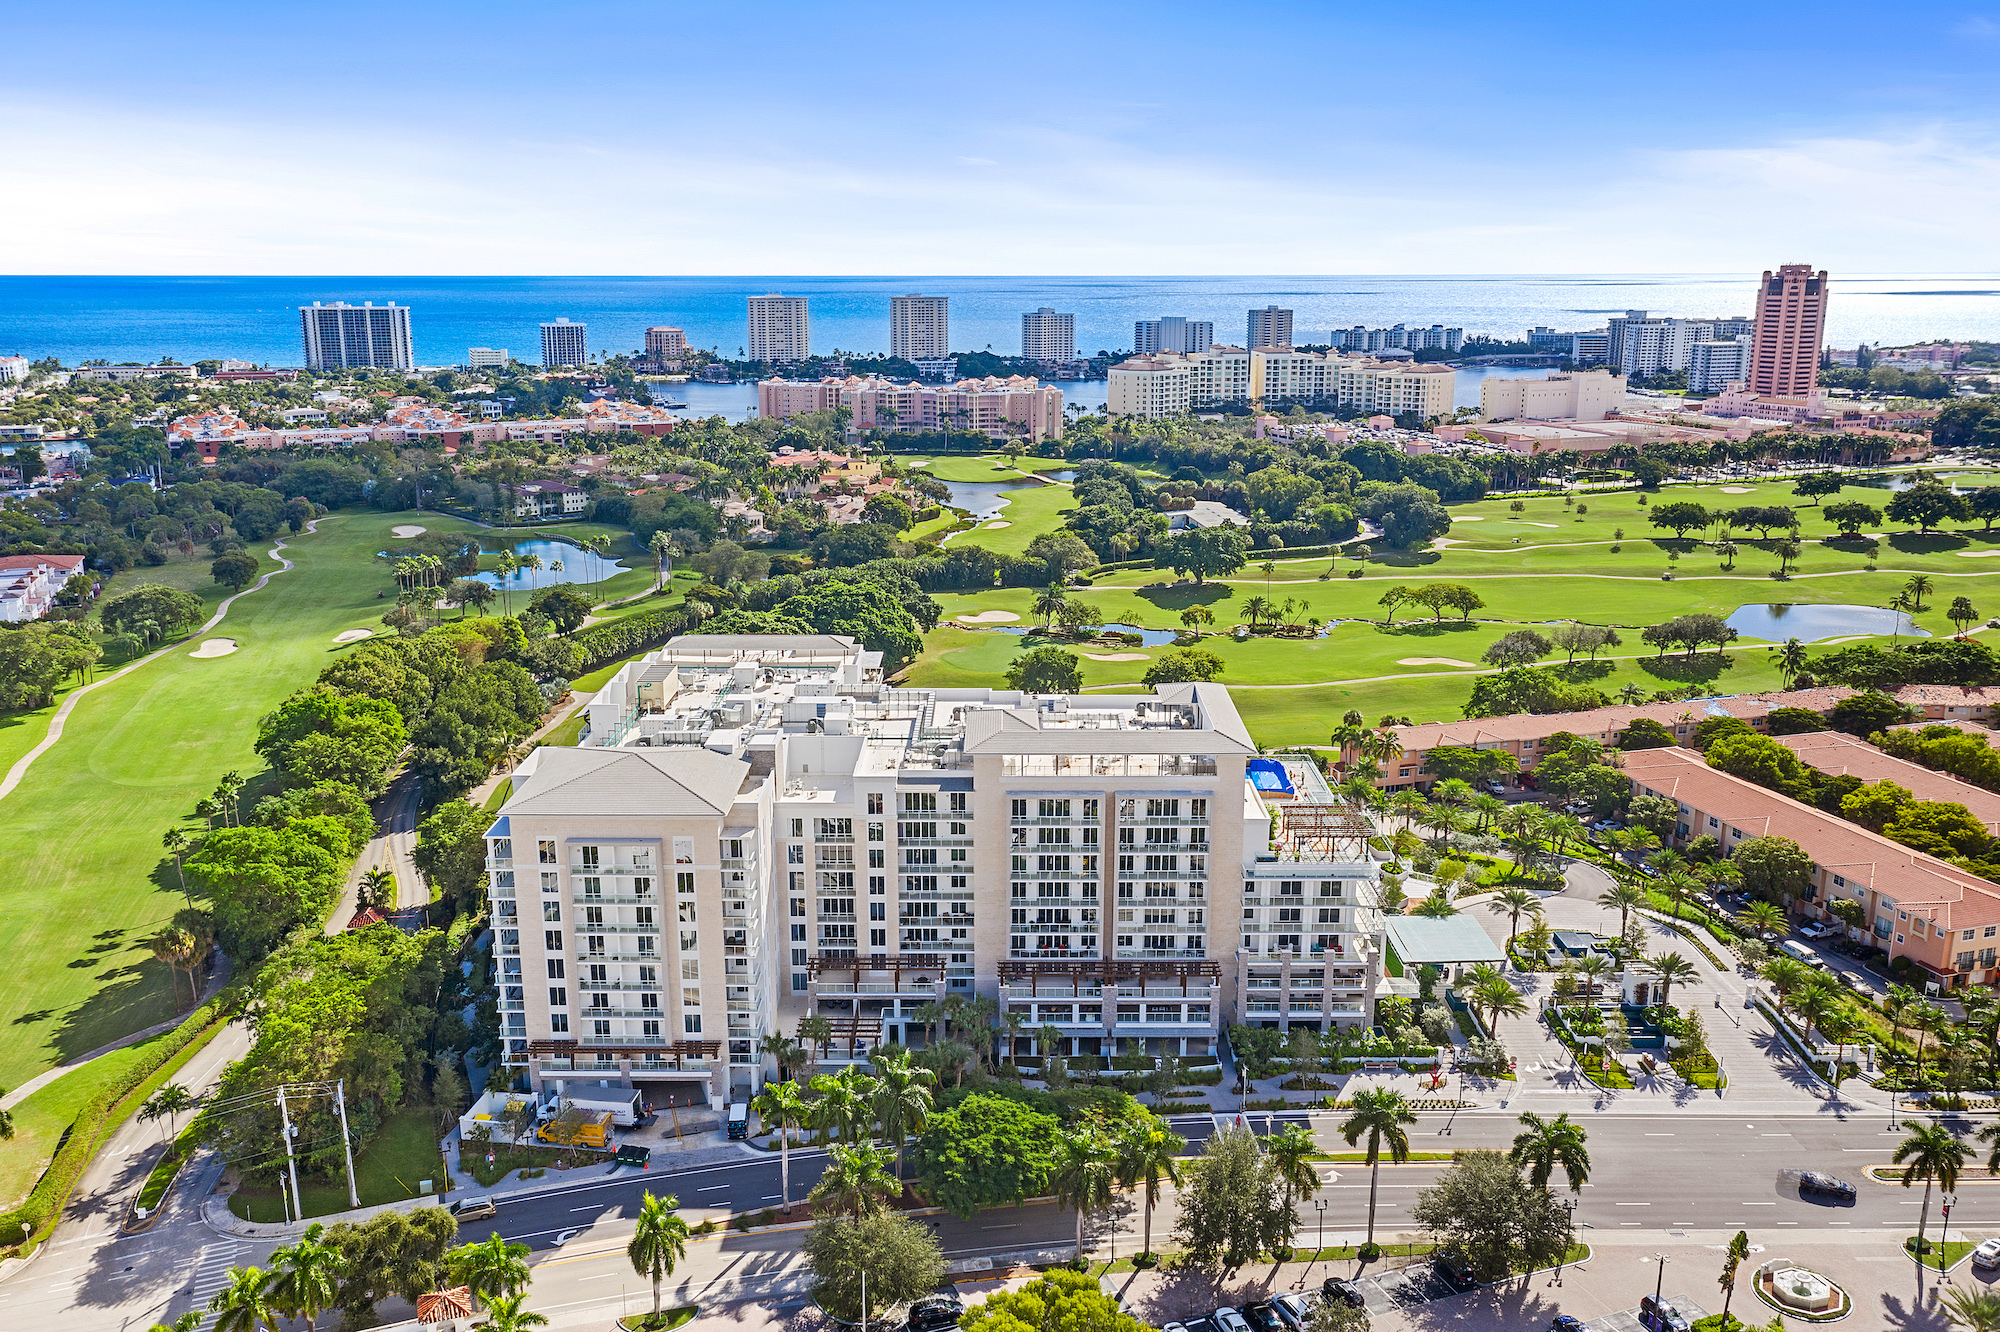 9 Reasons to Live in Boca Raton